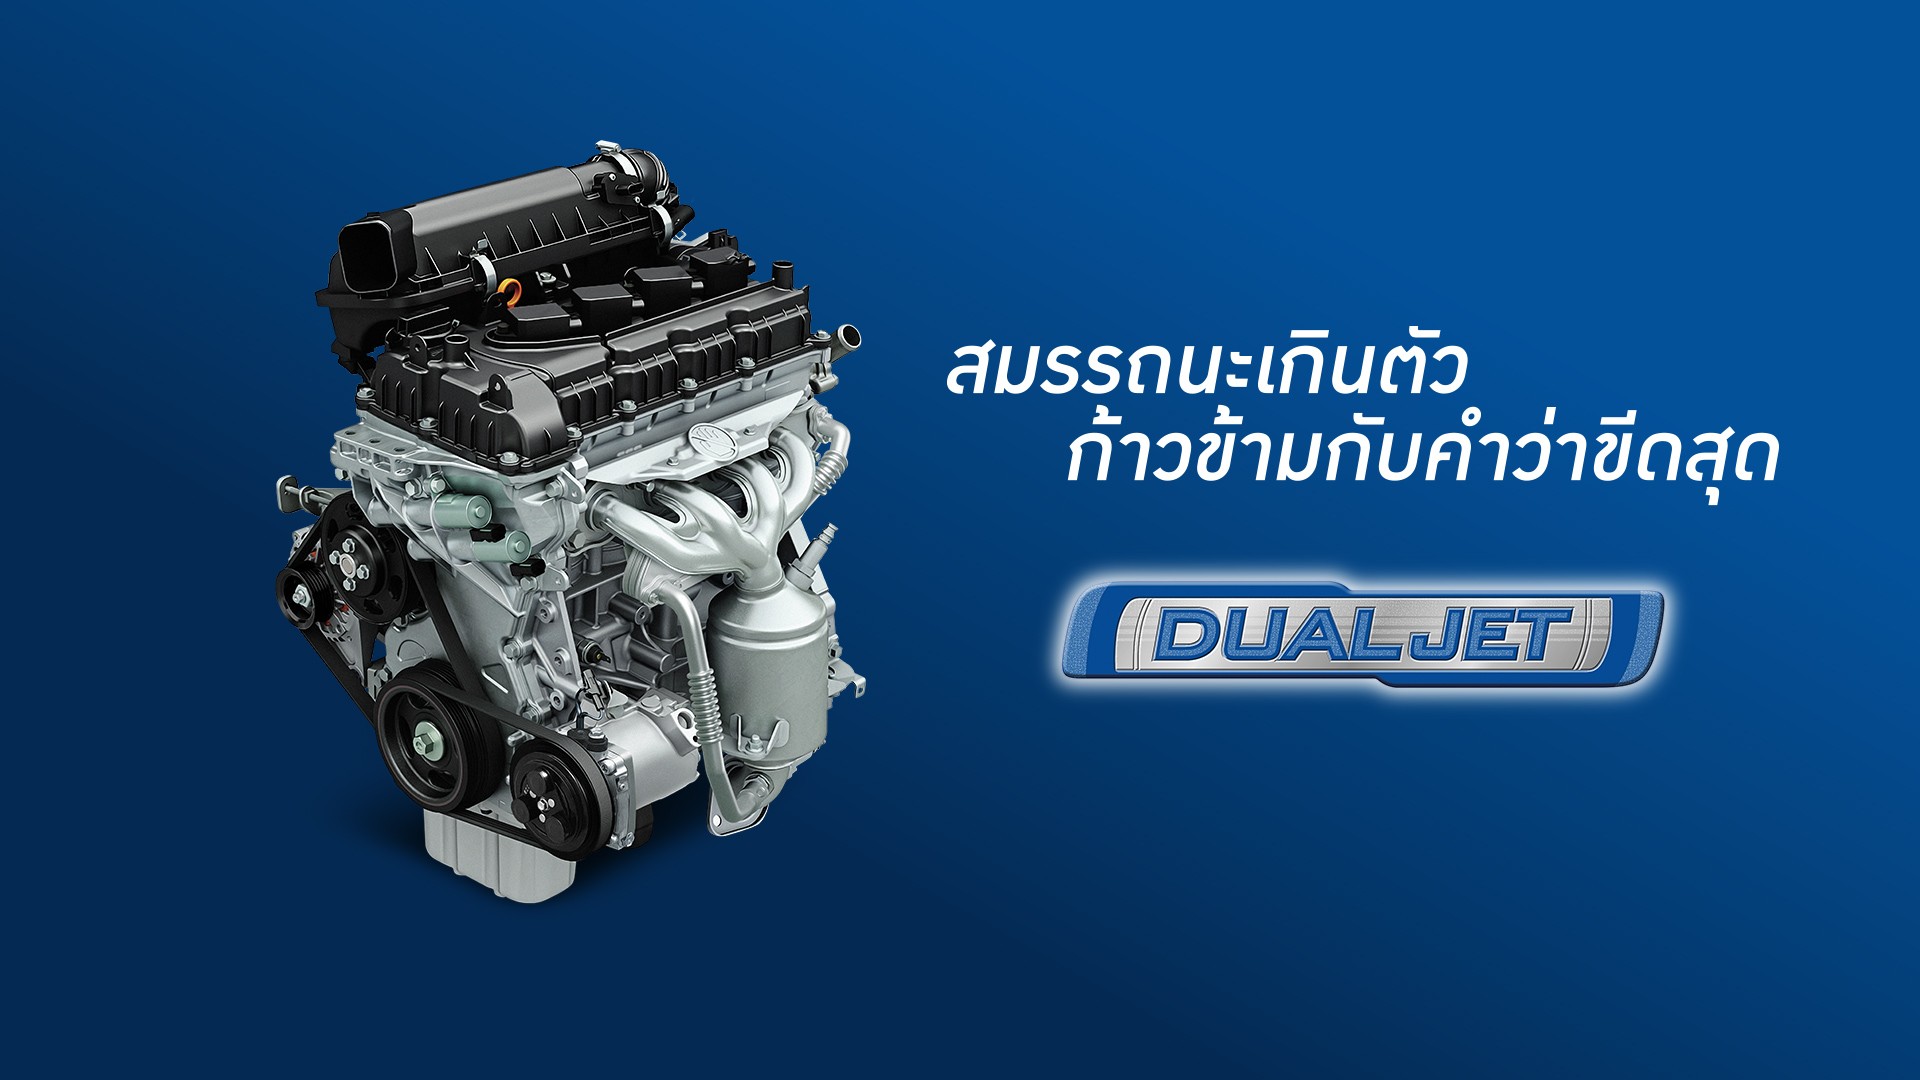 K12M engine with DUALJET Injection System and EGR